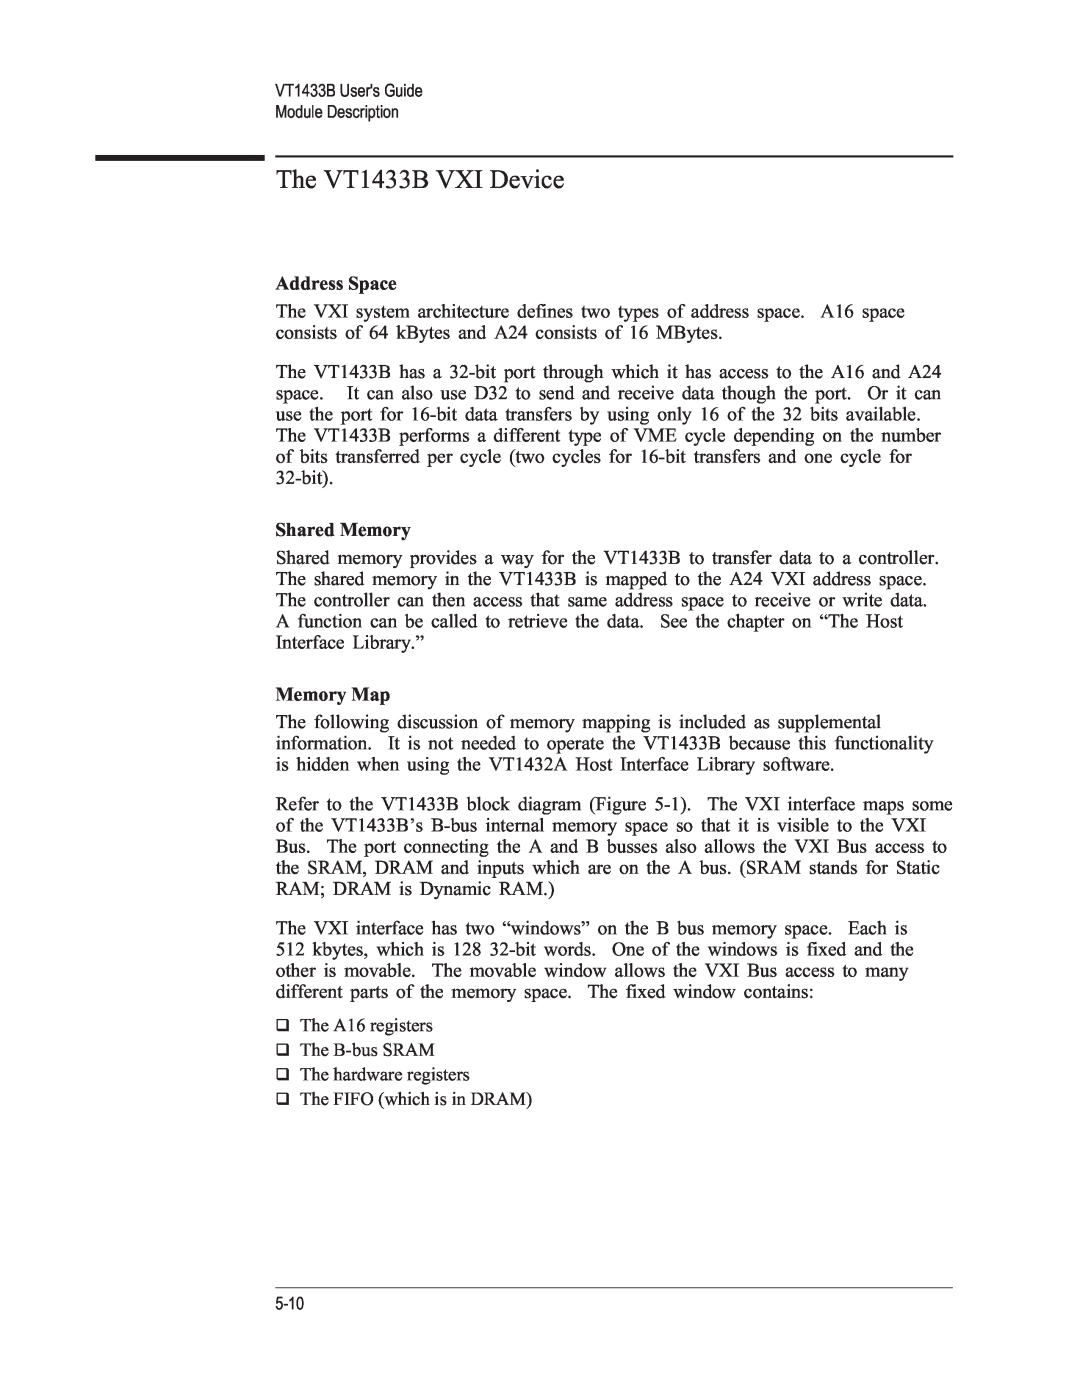 VXI manual The VT1433B VXI Device, Address Space, Shared Memory, Memory Map 